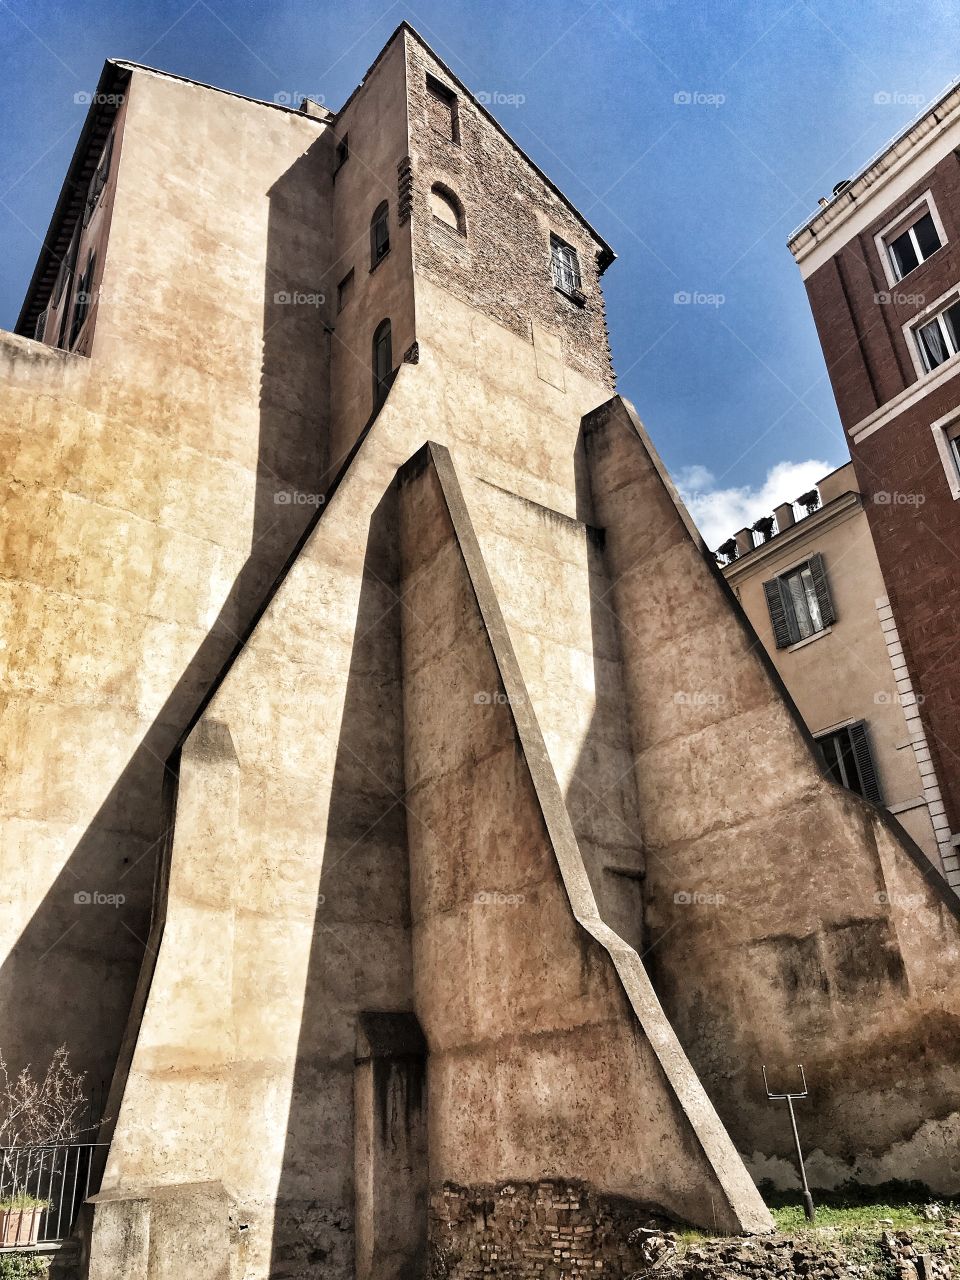 Buttressed building, Rome back streets 